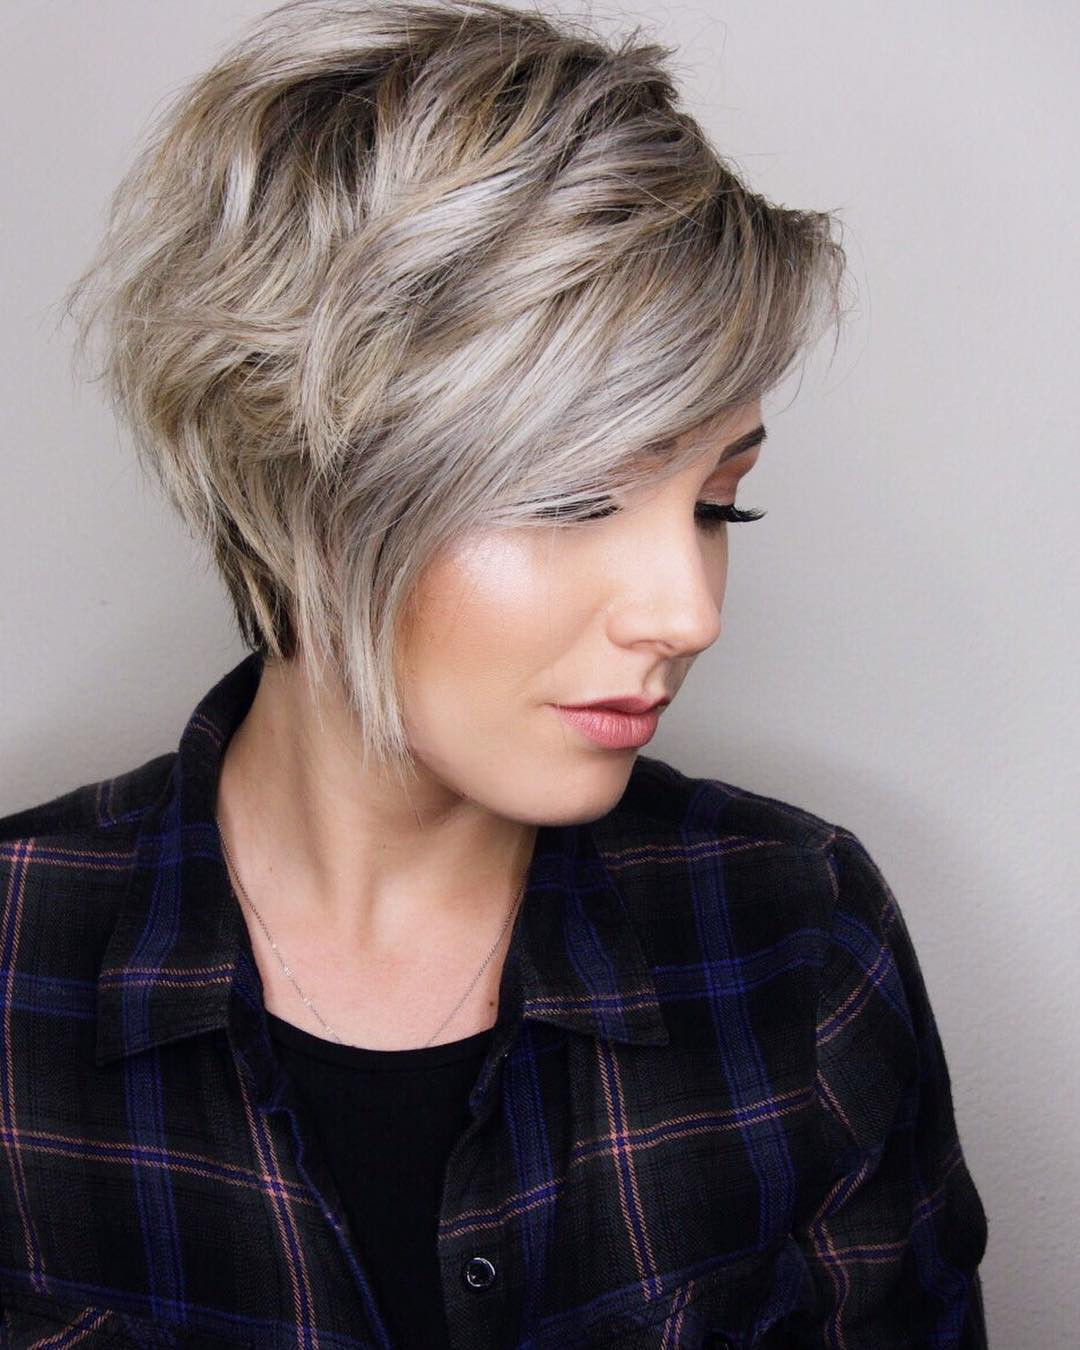 Hairstyles For Short Layered Hair
 10 Trendy Layered Short Haircut Ideas 2020 Extra